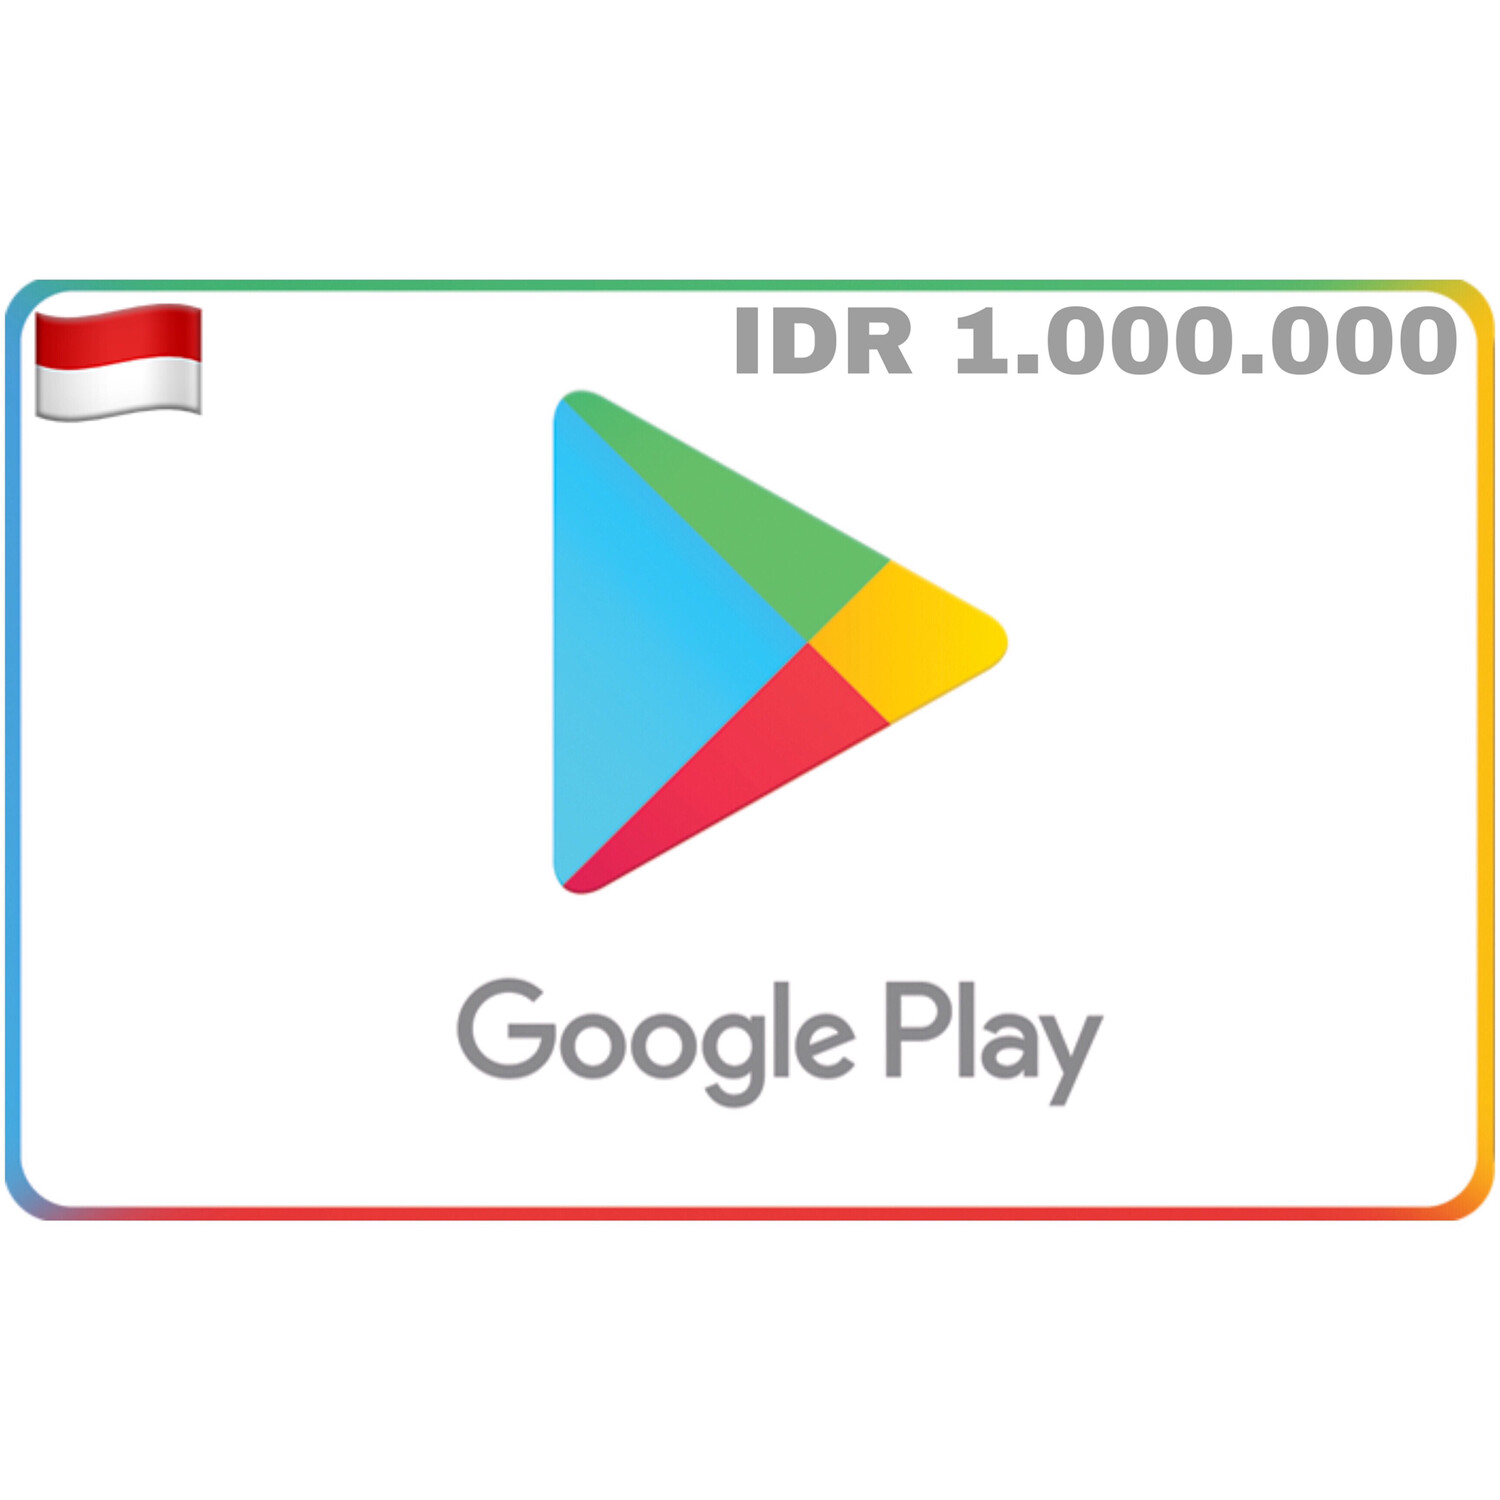 Google Play Gift Card Indonesia IDR 1.000.000